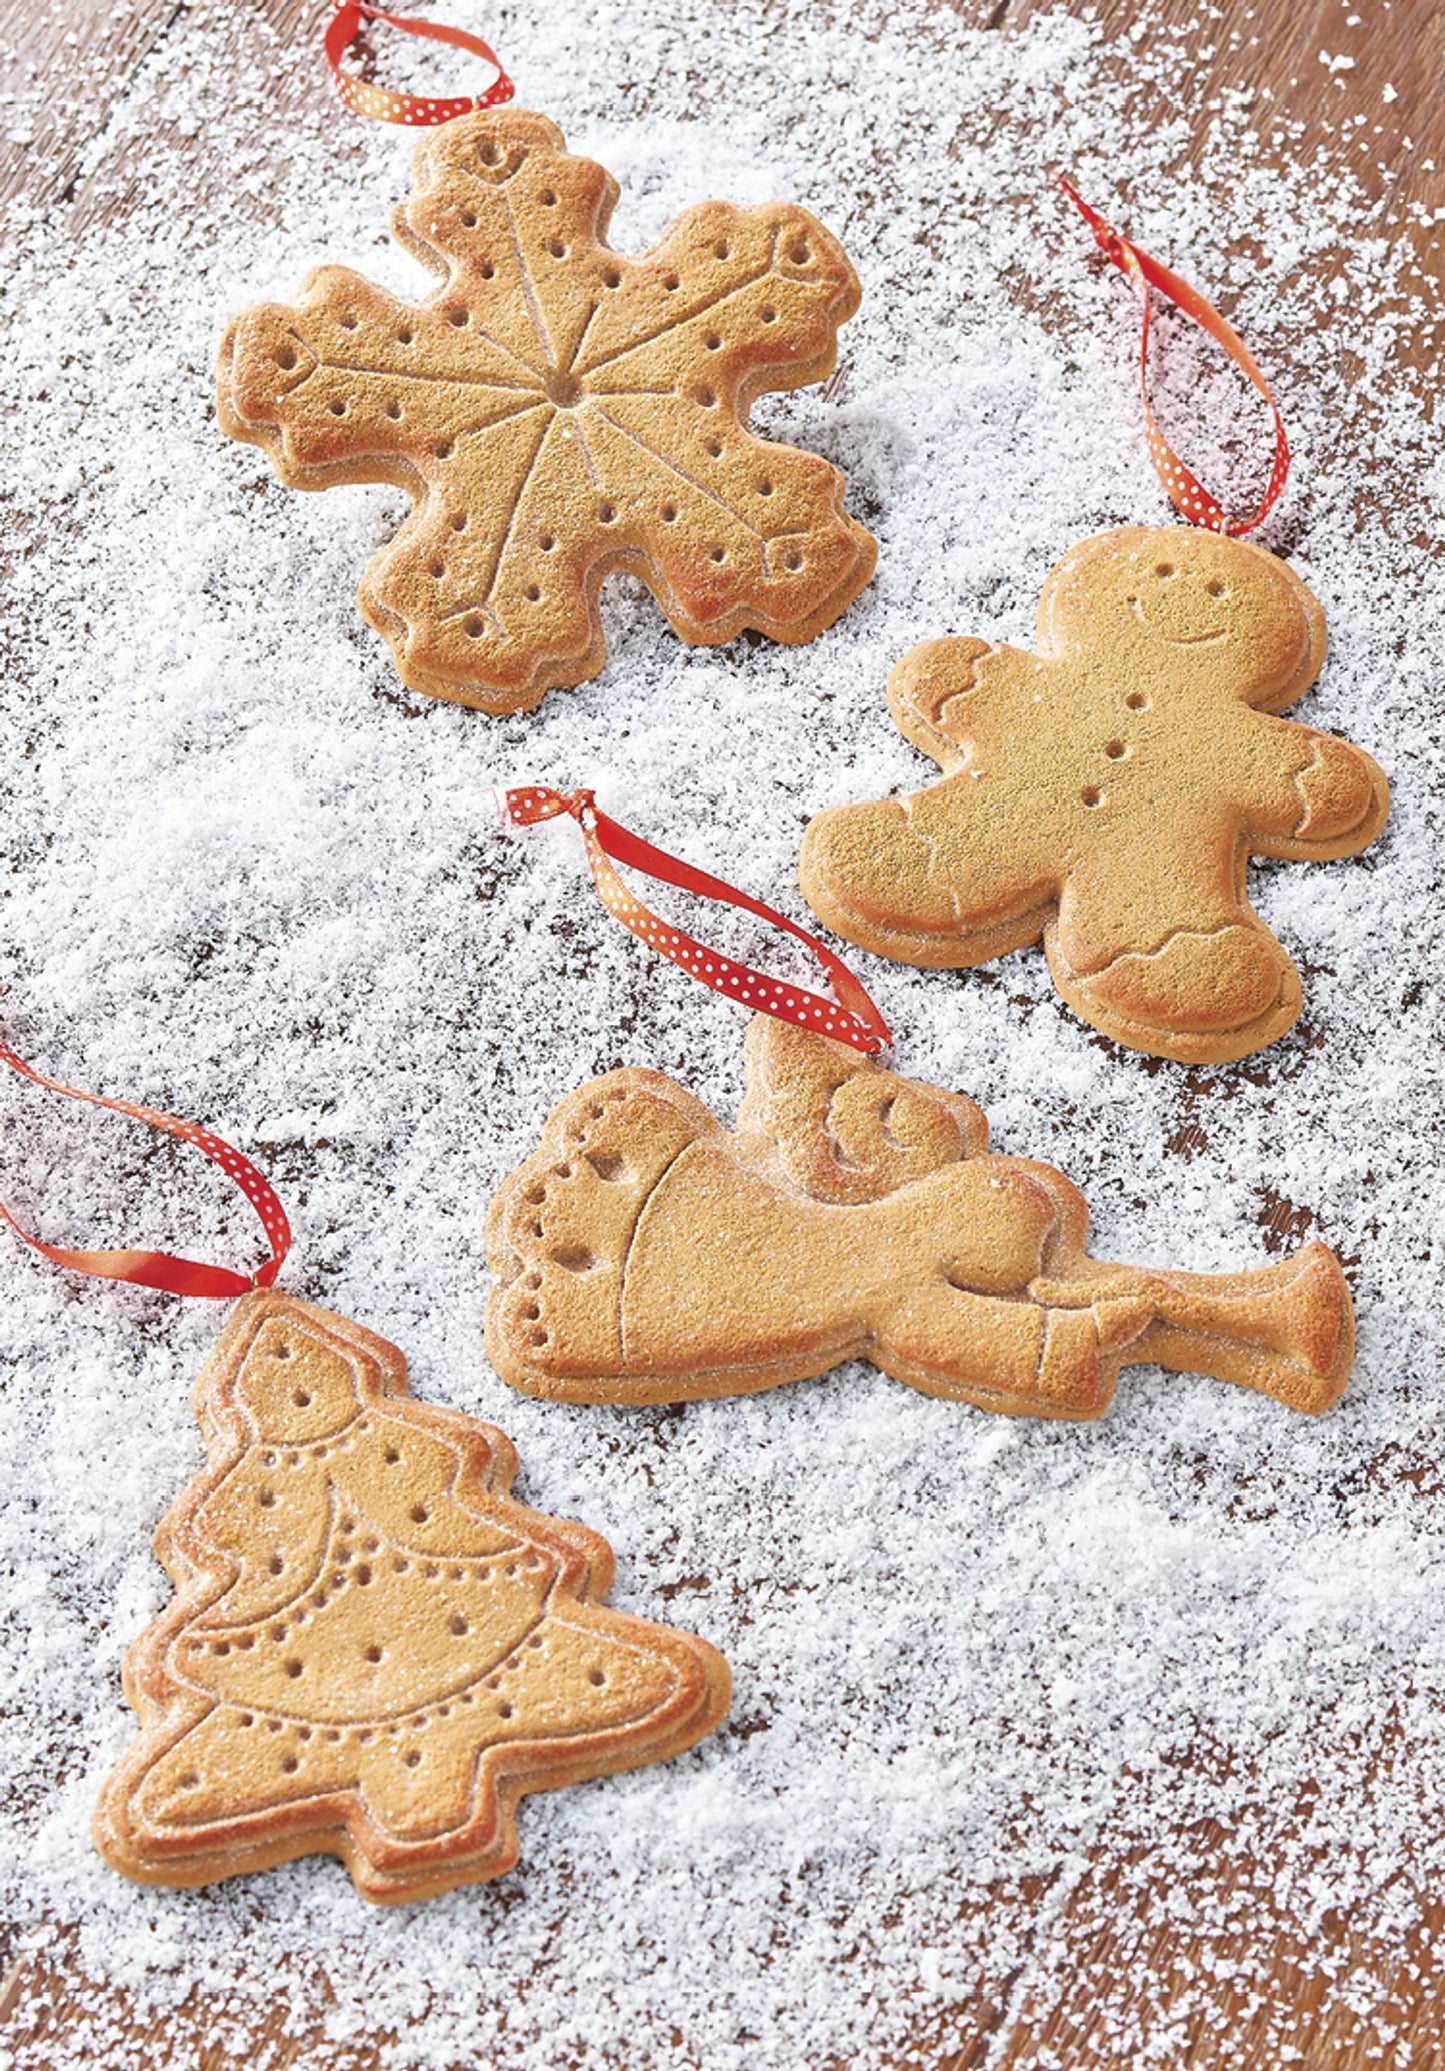 4119067-6.25" Gingerbread Cookie Ornaments. Christmas Tree, Angel, Gingerbread Man, or Star Cookie Shapes. Perfect just-baked look.